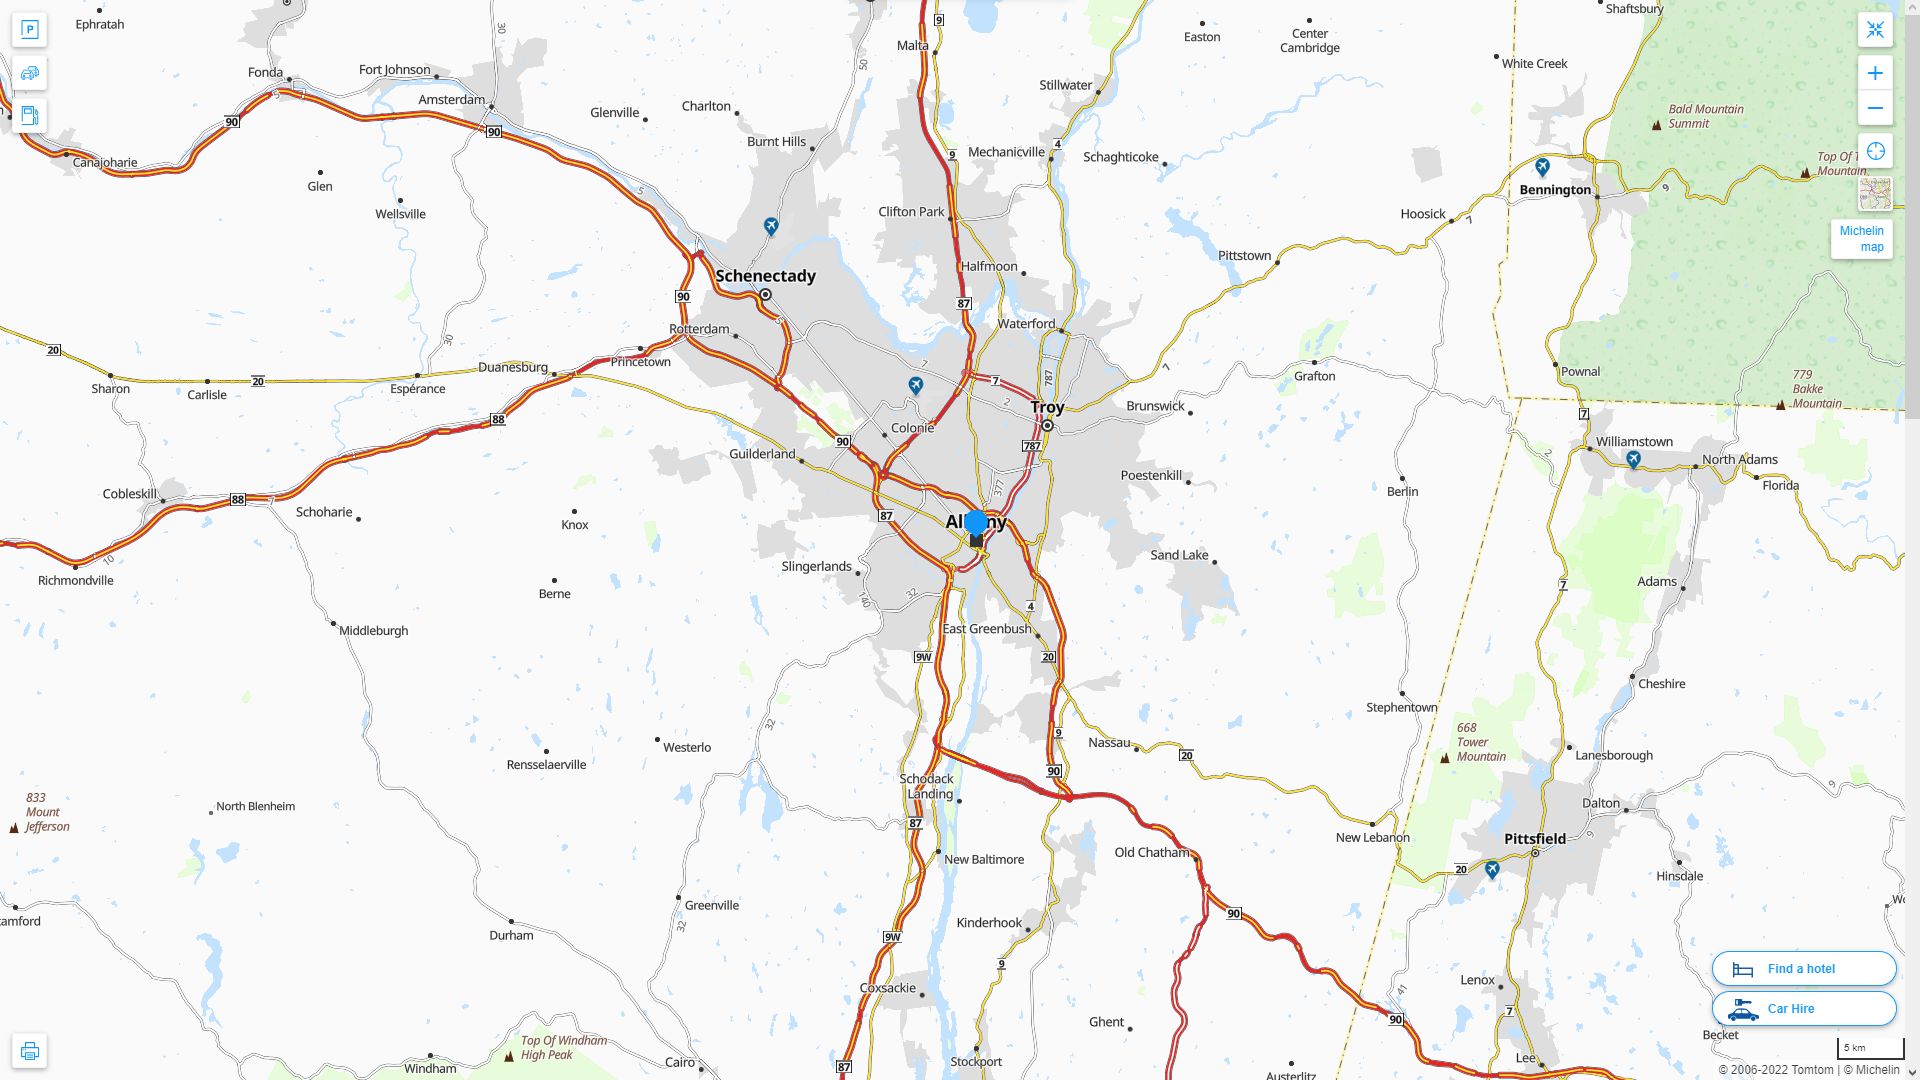 Albany New York Highway and Road Map